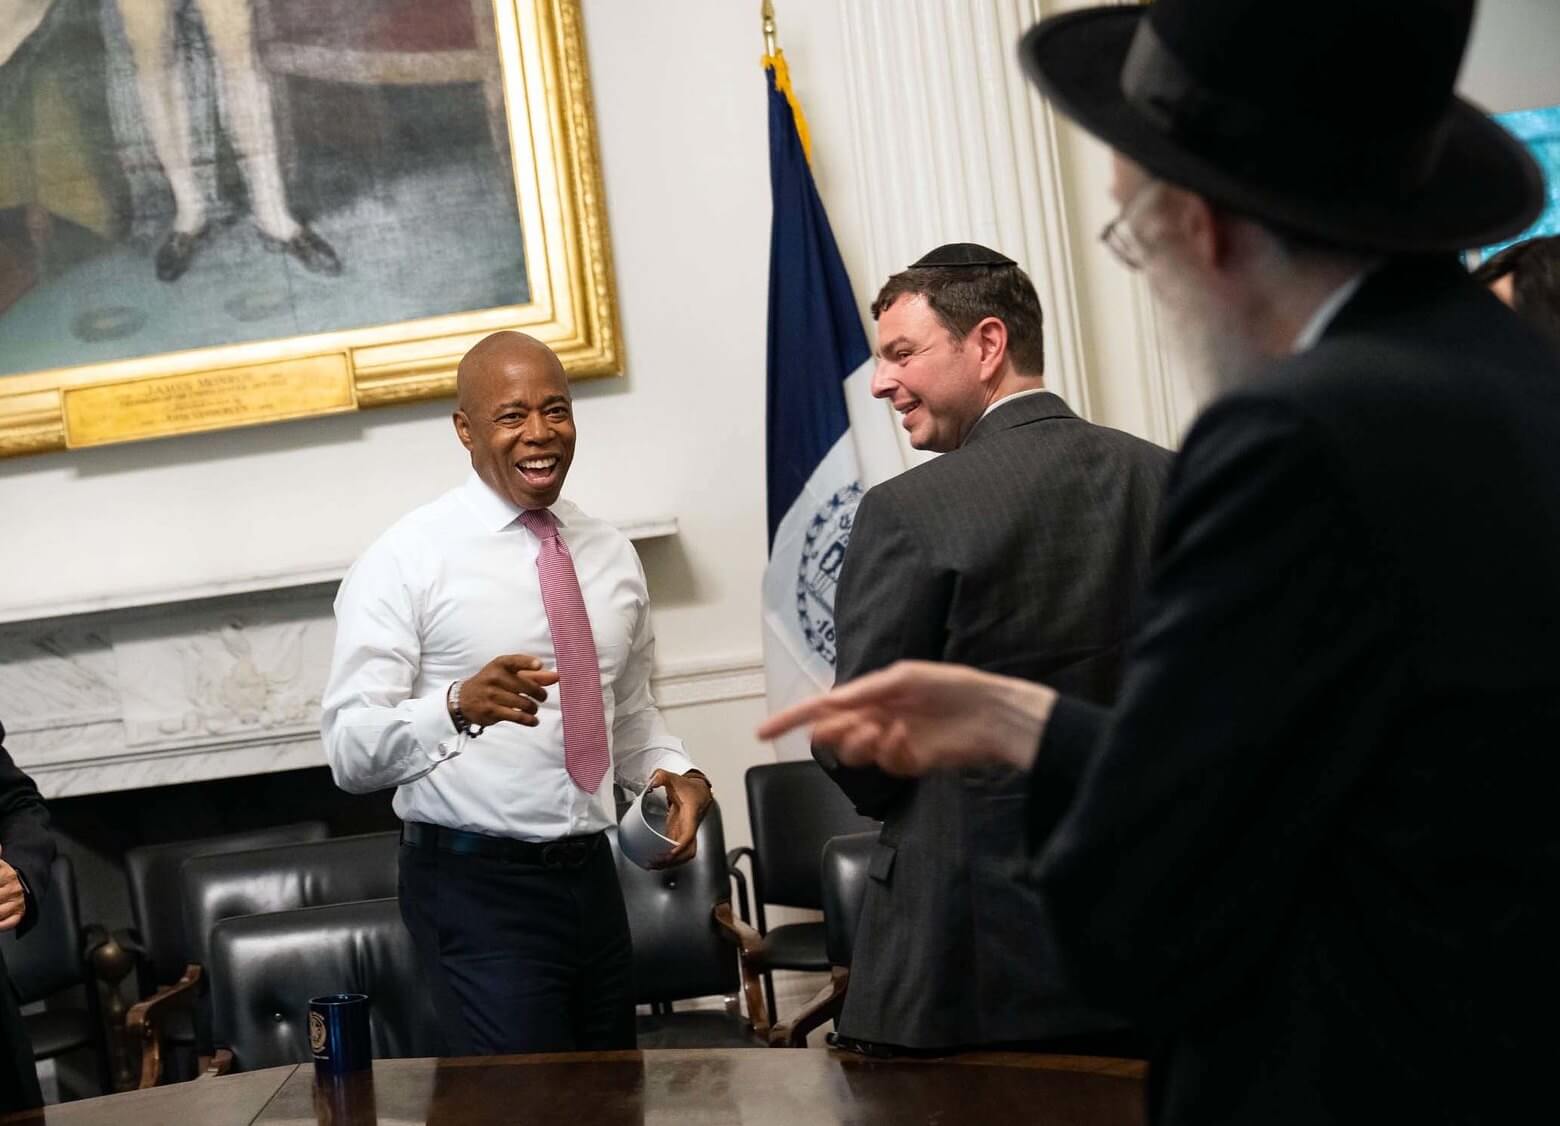 NYC Mayor Eric Adams with a Yiddish-speaking reporter during an ethnic media roundtable on Sept. 19, 2022.